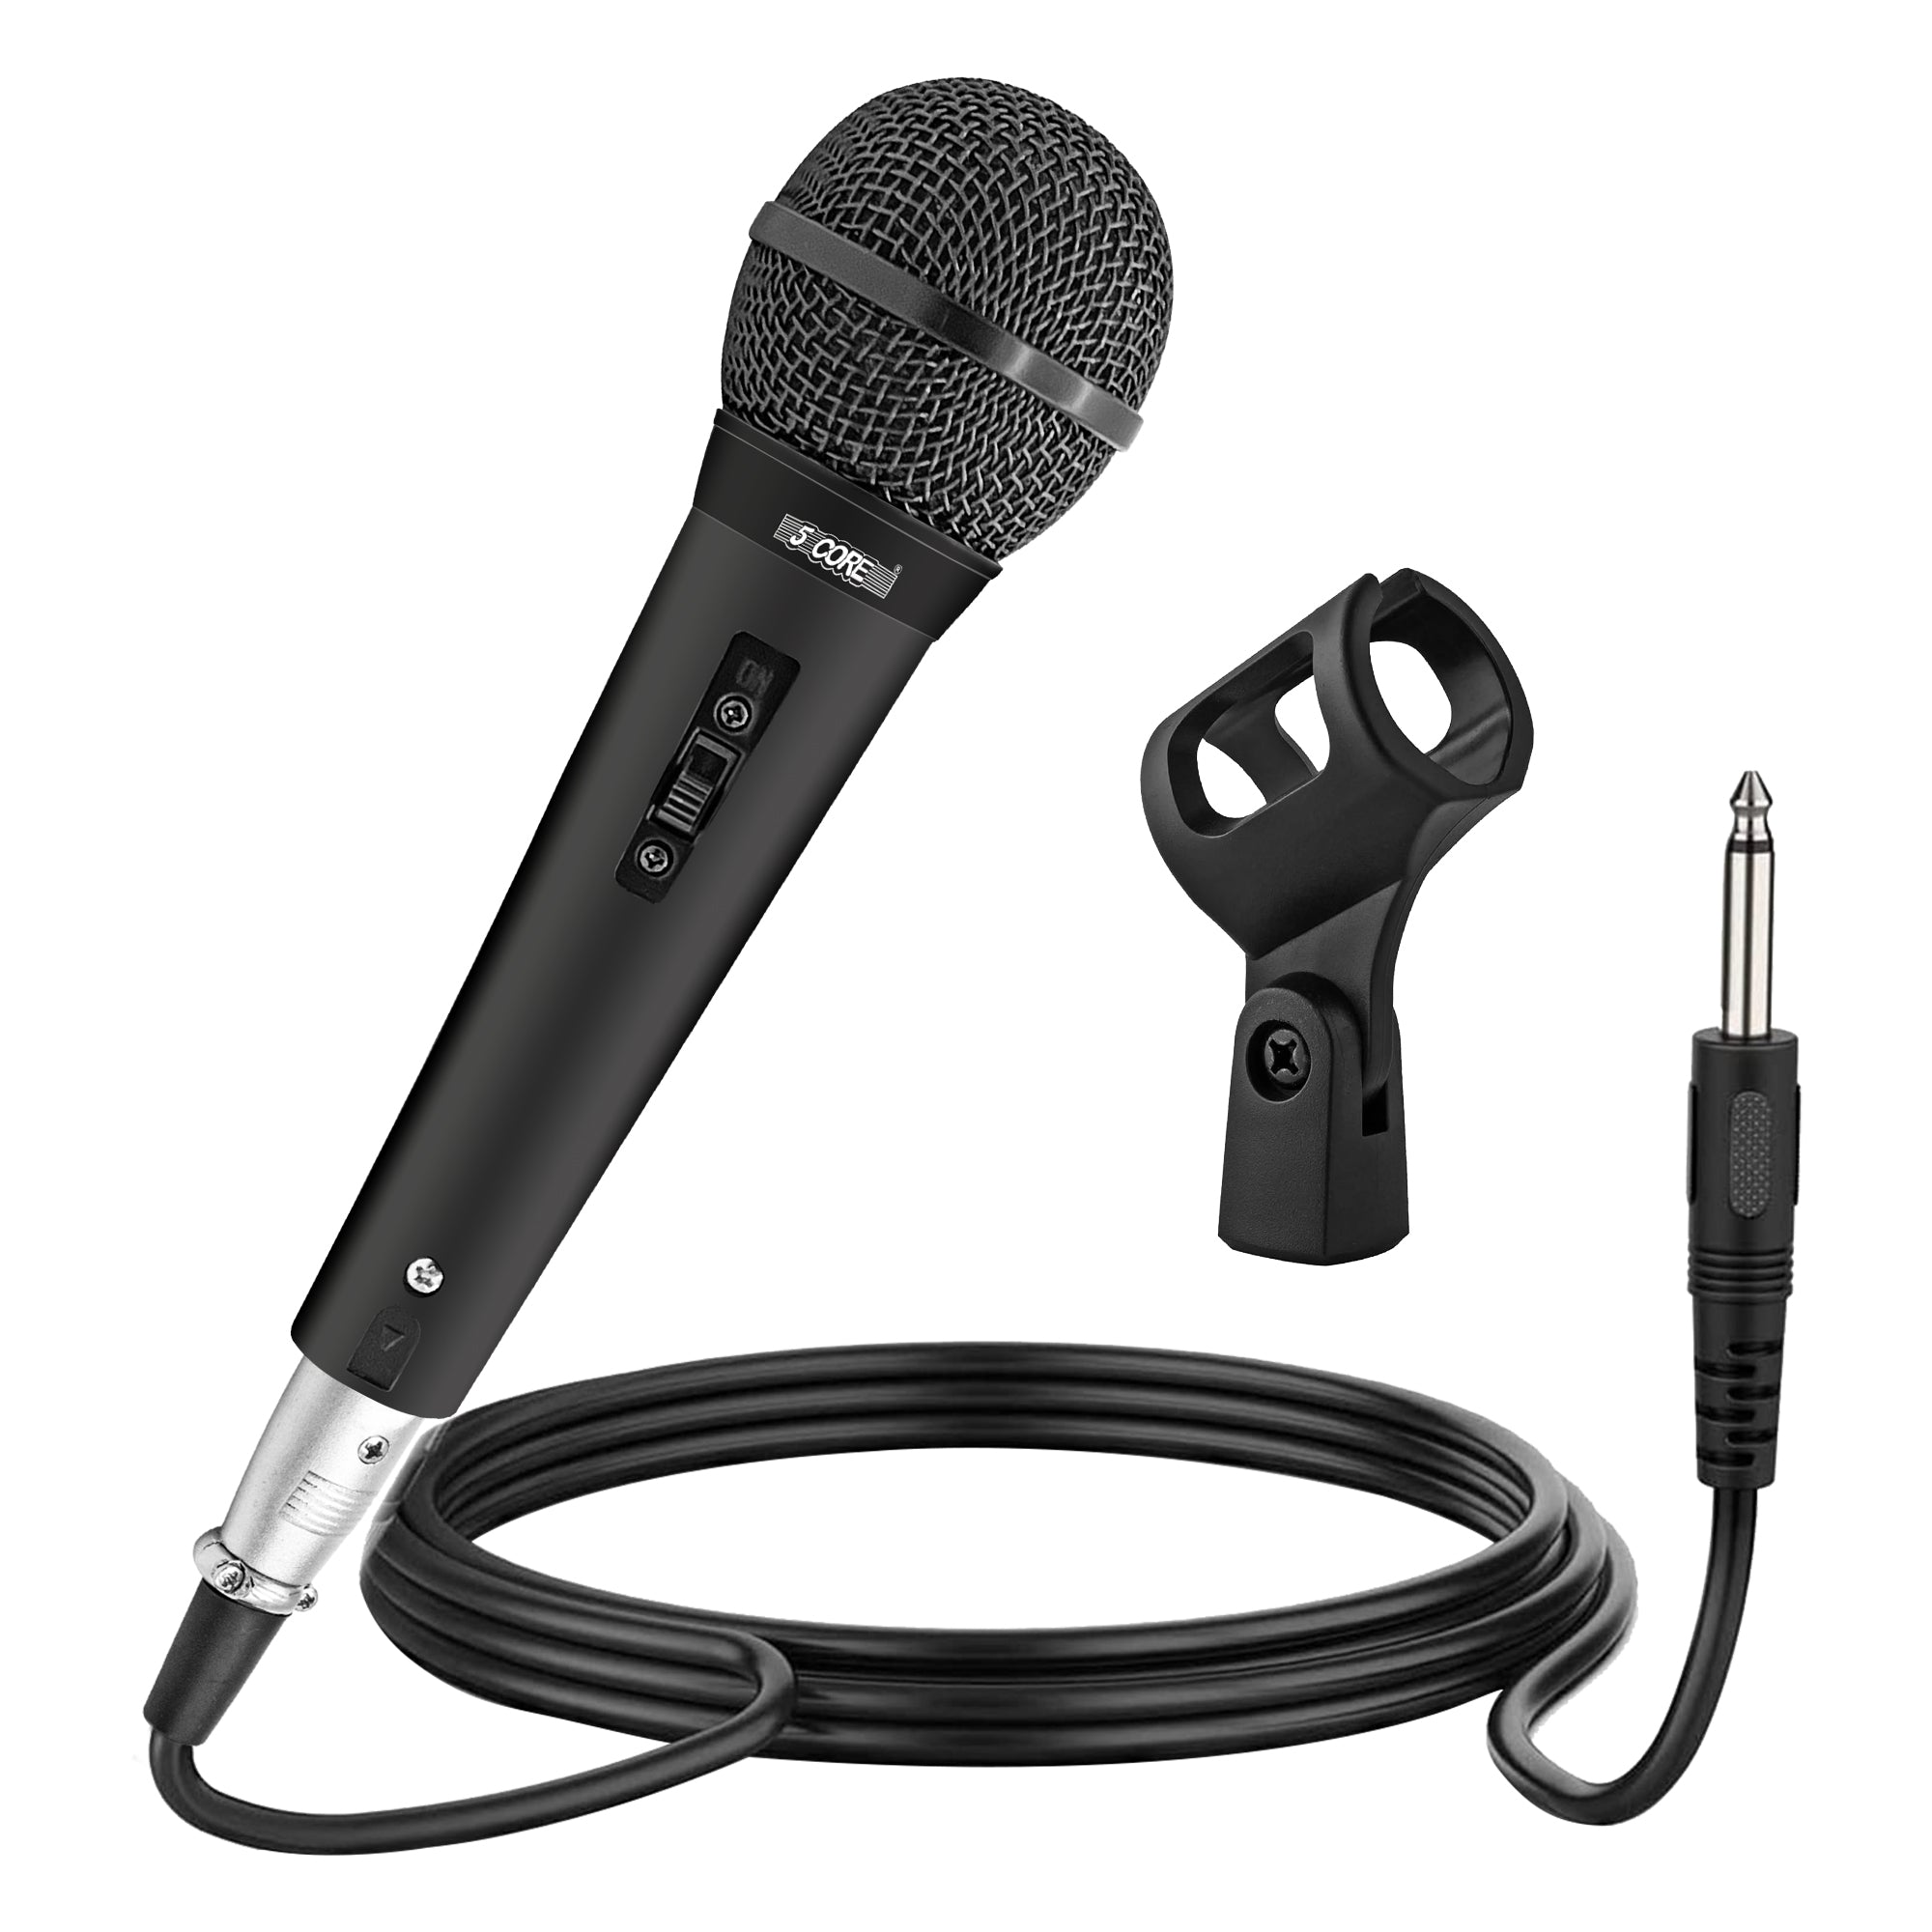 5 Core Microphone 4 Pieces Professional Black Dynamic Karaoke XLR Wired Mic w ON/OFF Switch Integrated Pop Filter Cardioid Unidirectional Pickup Handheld Micrófono for Singing DJ Podcast Speeches Includes Cable Mic Holder - PM 757 4PCS